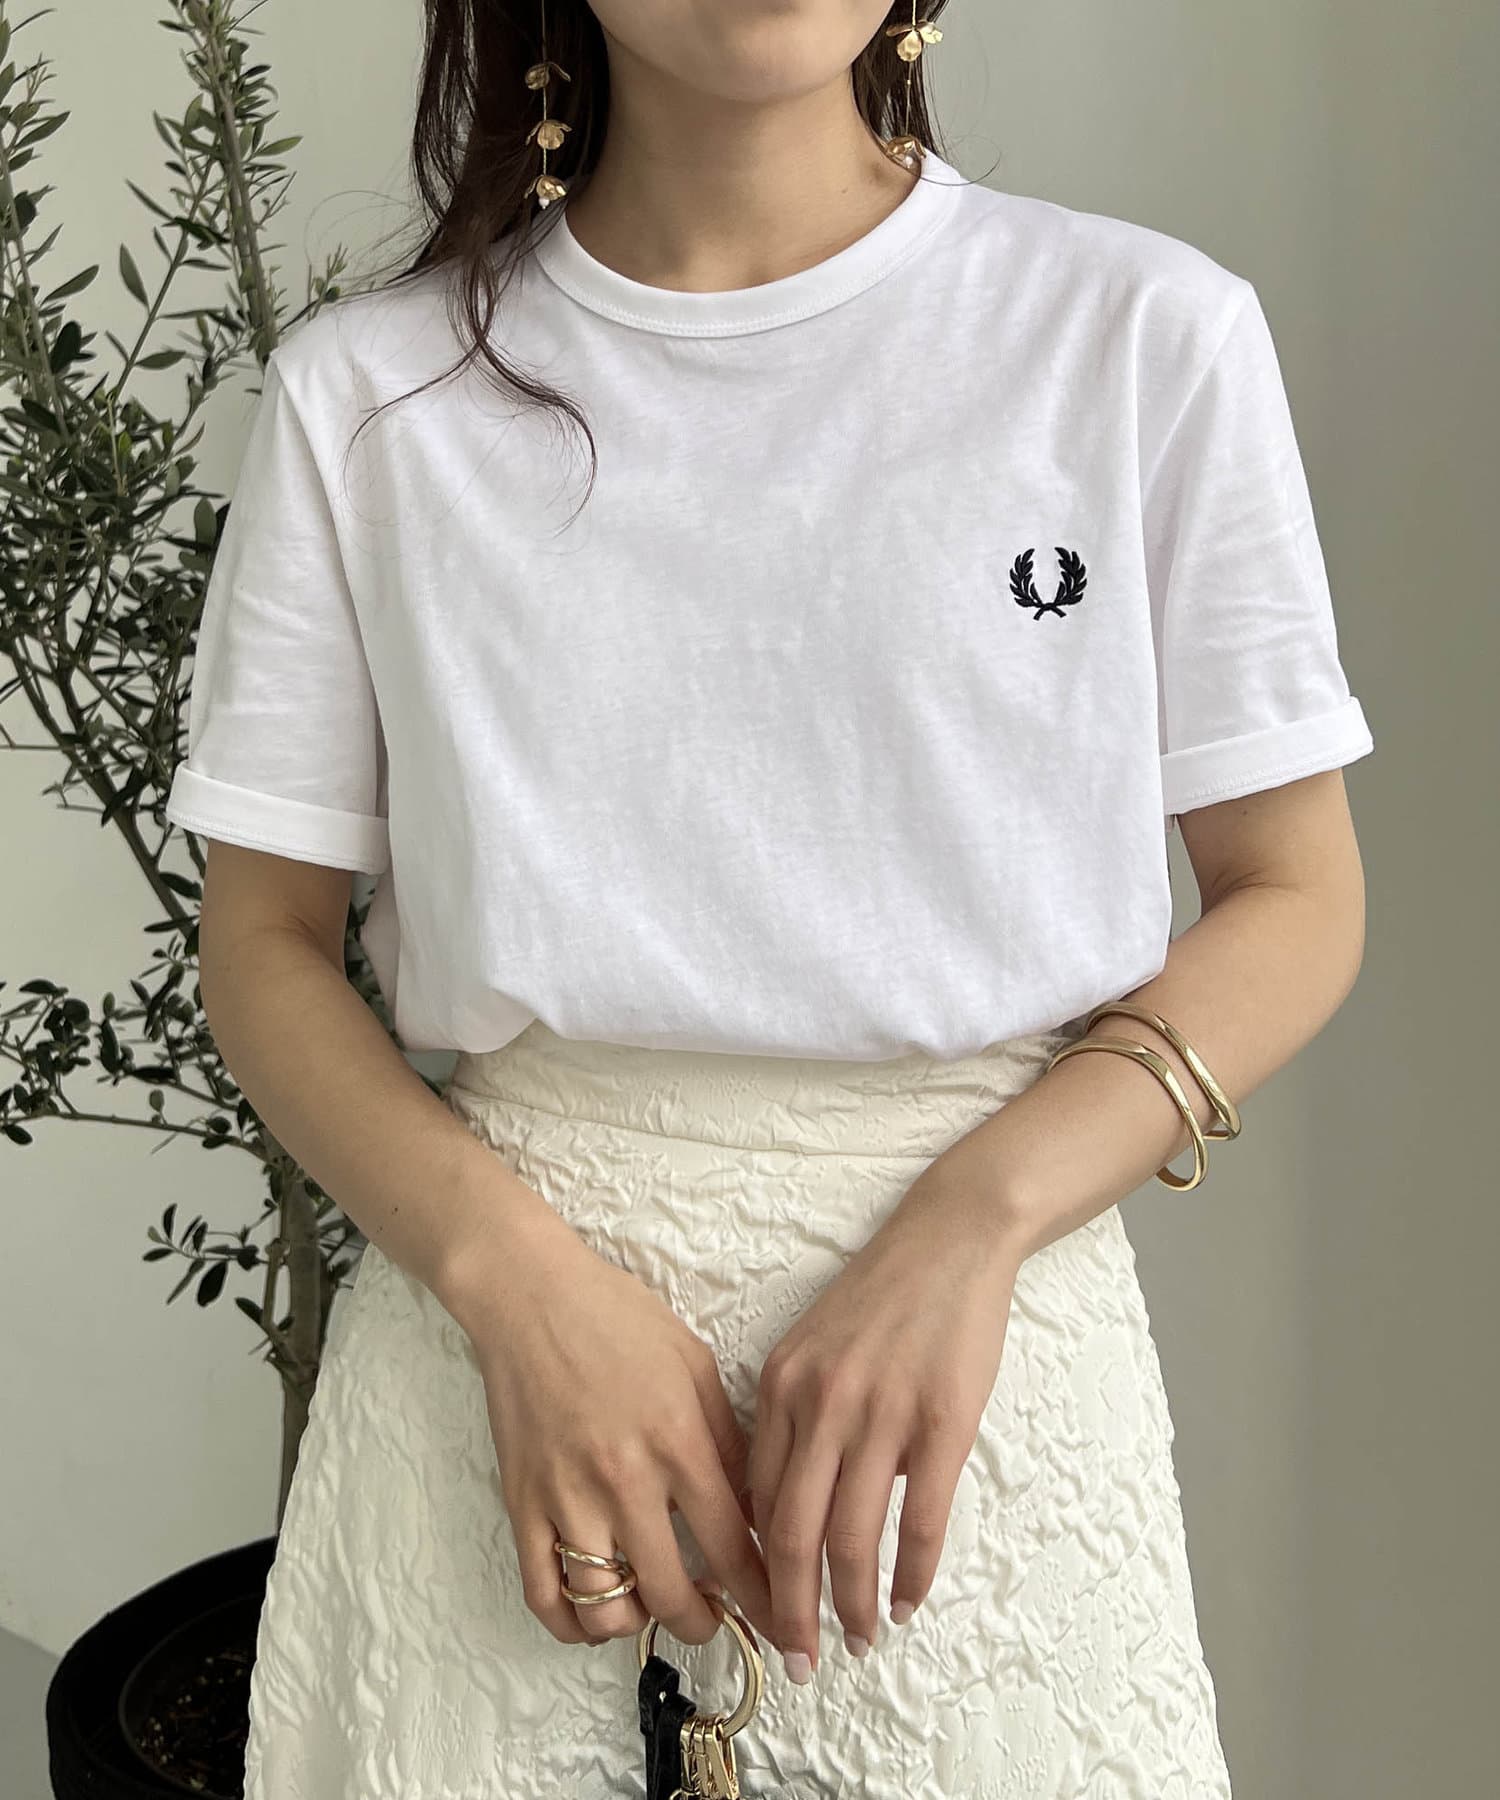 CAPRICIEUX LE'MAGE(カプリシュレマージュ) 【WEB・一部店舗限定】〈FRED PERRY〉ワンポイントTシャツ